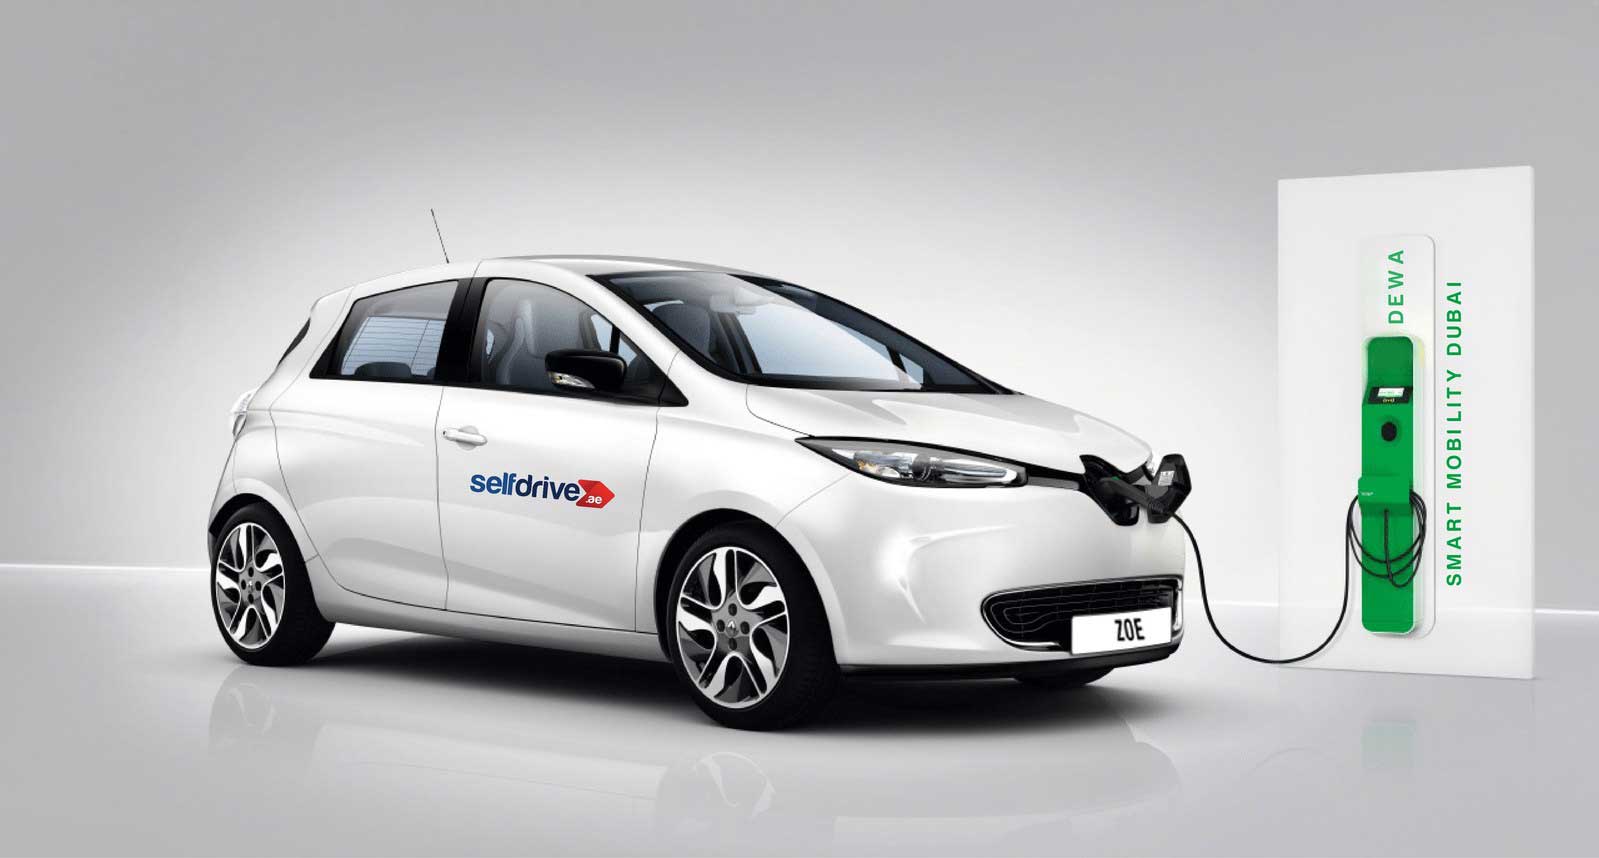 Rent an electric car in Dubai for AED5 per hour Arabianbusiness